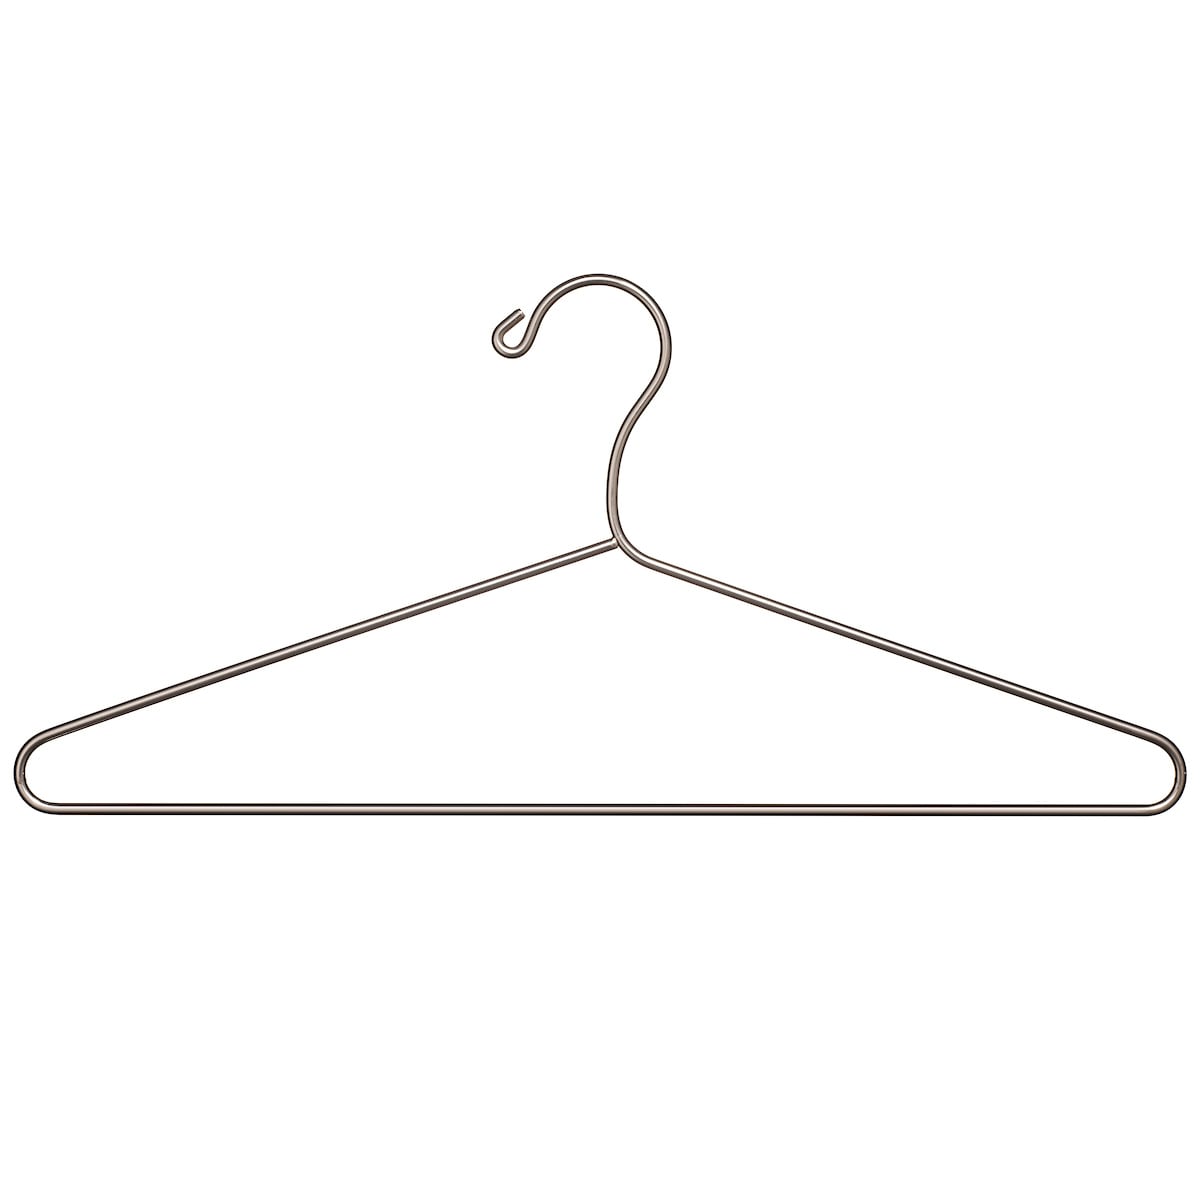 Stainless steel Hangers at Lowes.com